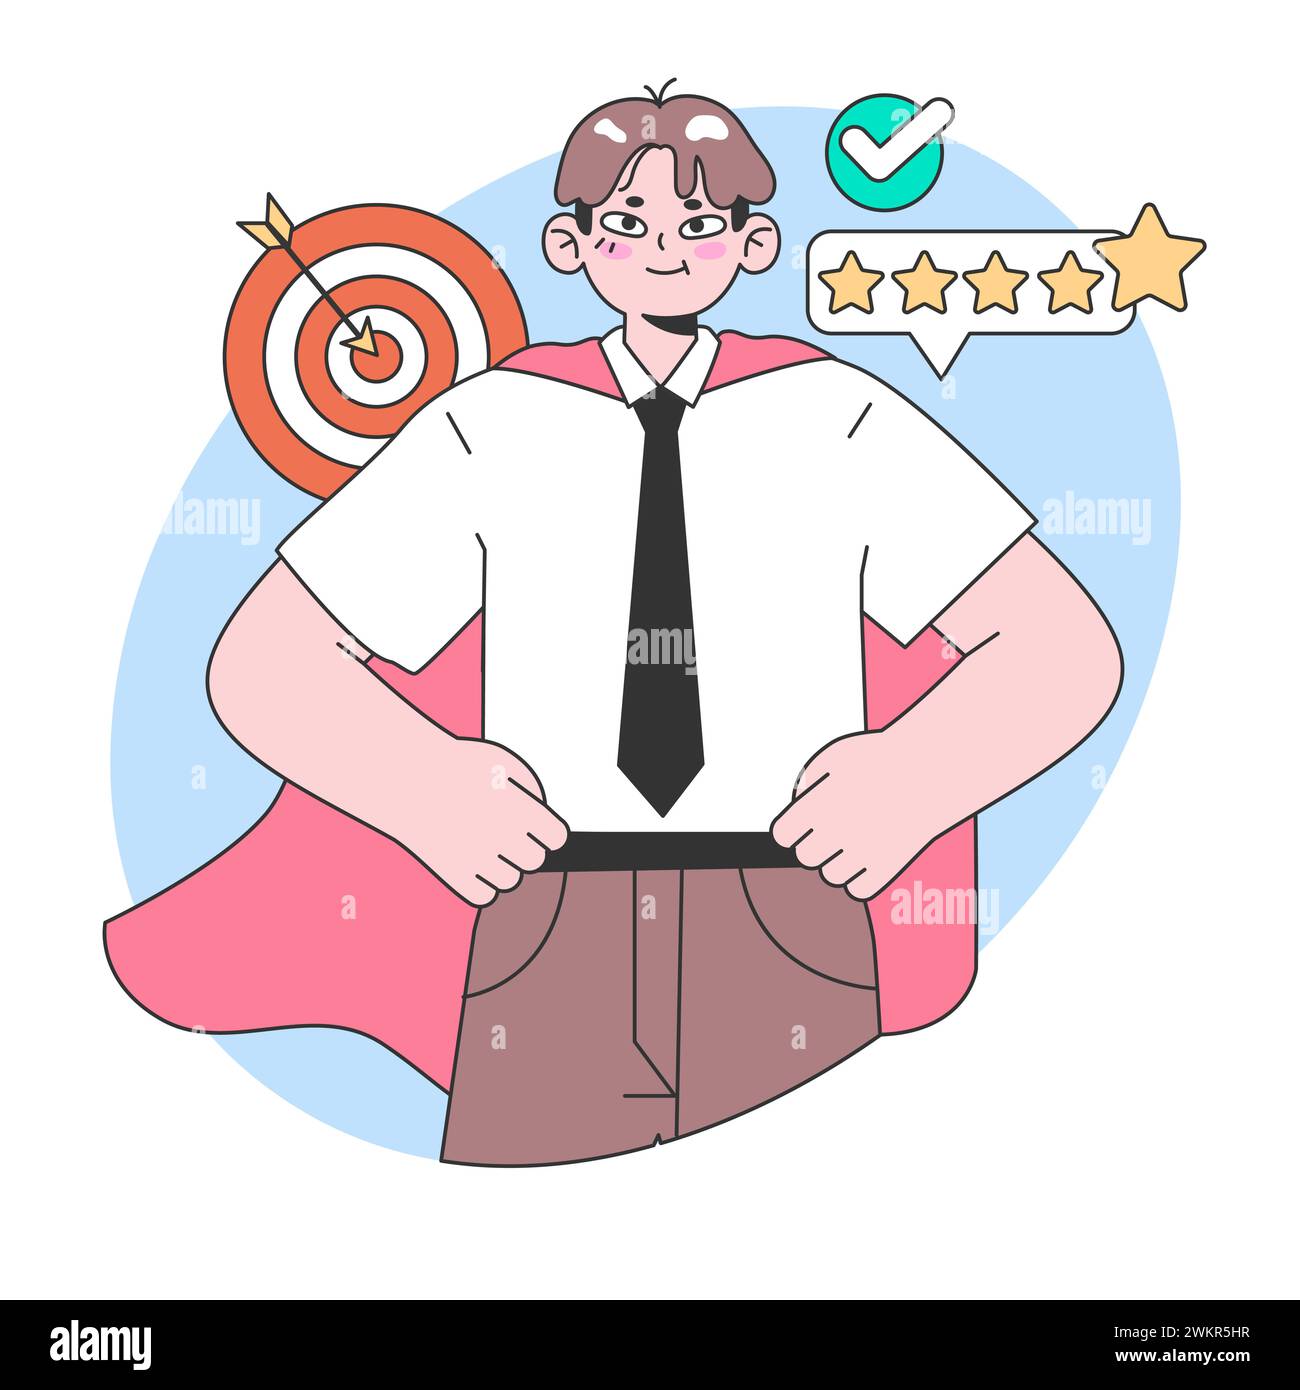 Performance excellence concept. Confident man with superhero cape, hitting the bullseye and receiving a five-star review, signifying top-notch achievement and success. Flat vector illustration. Stock Vector